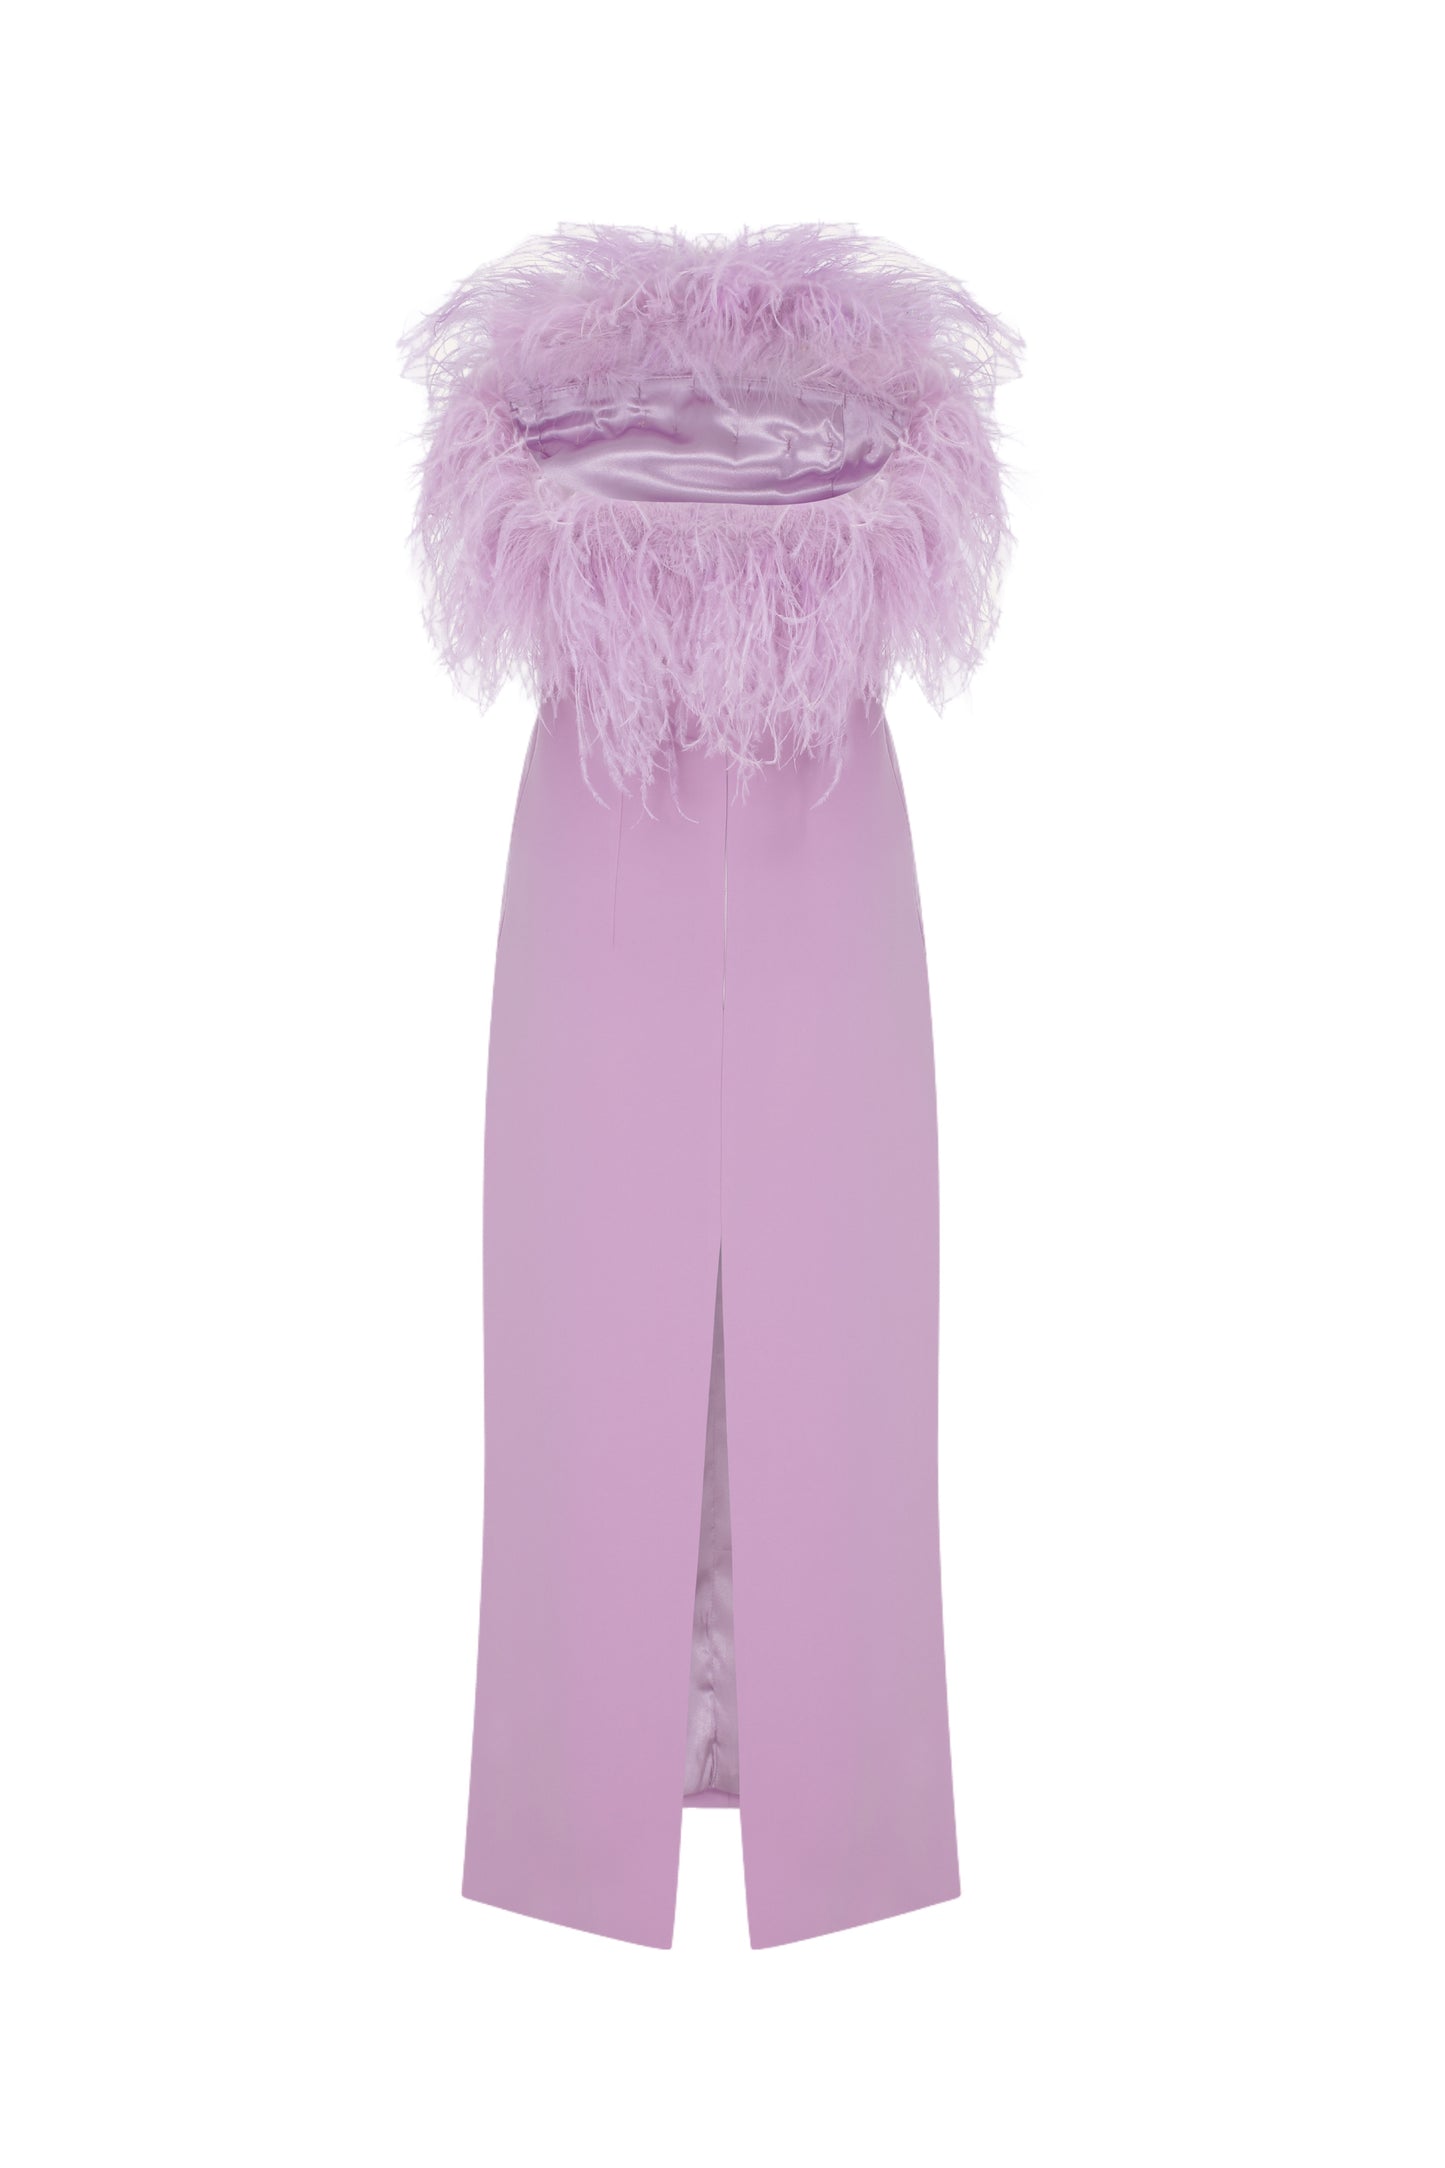 Alanis - Strapless Lilac Midi Dress With Feather Details